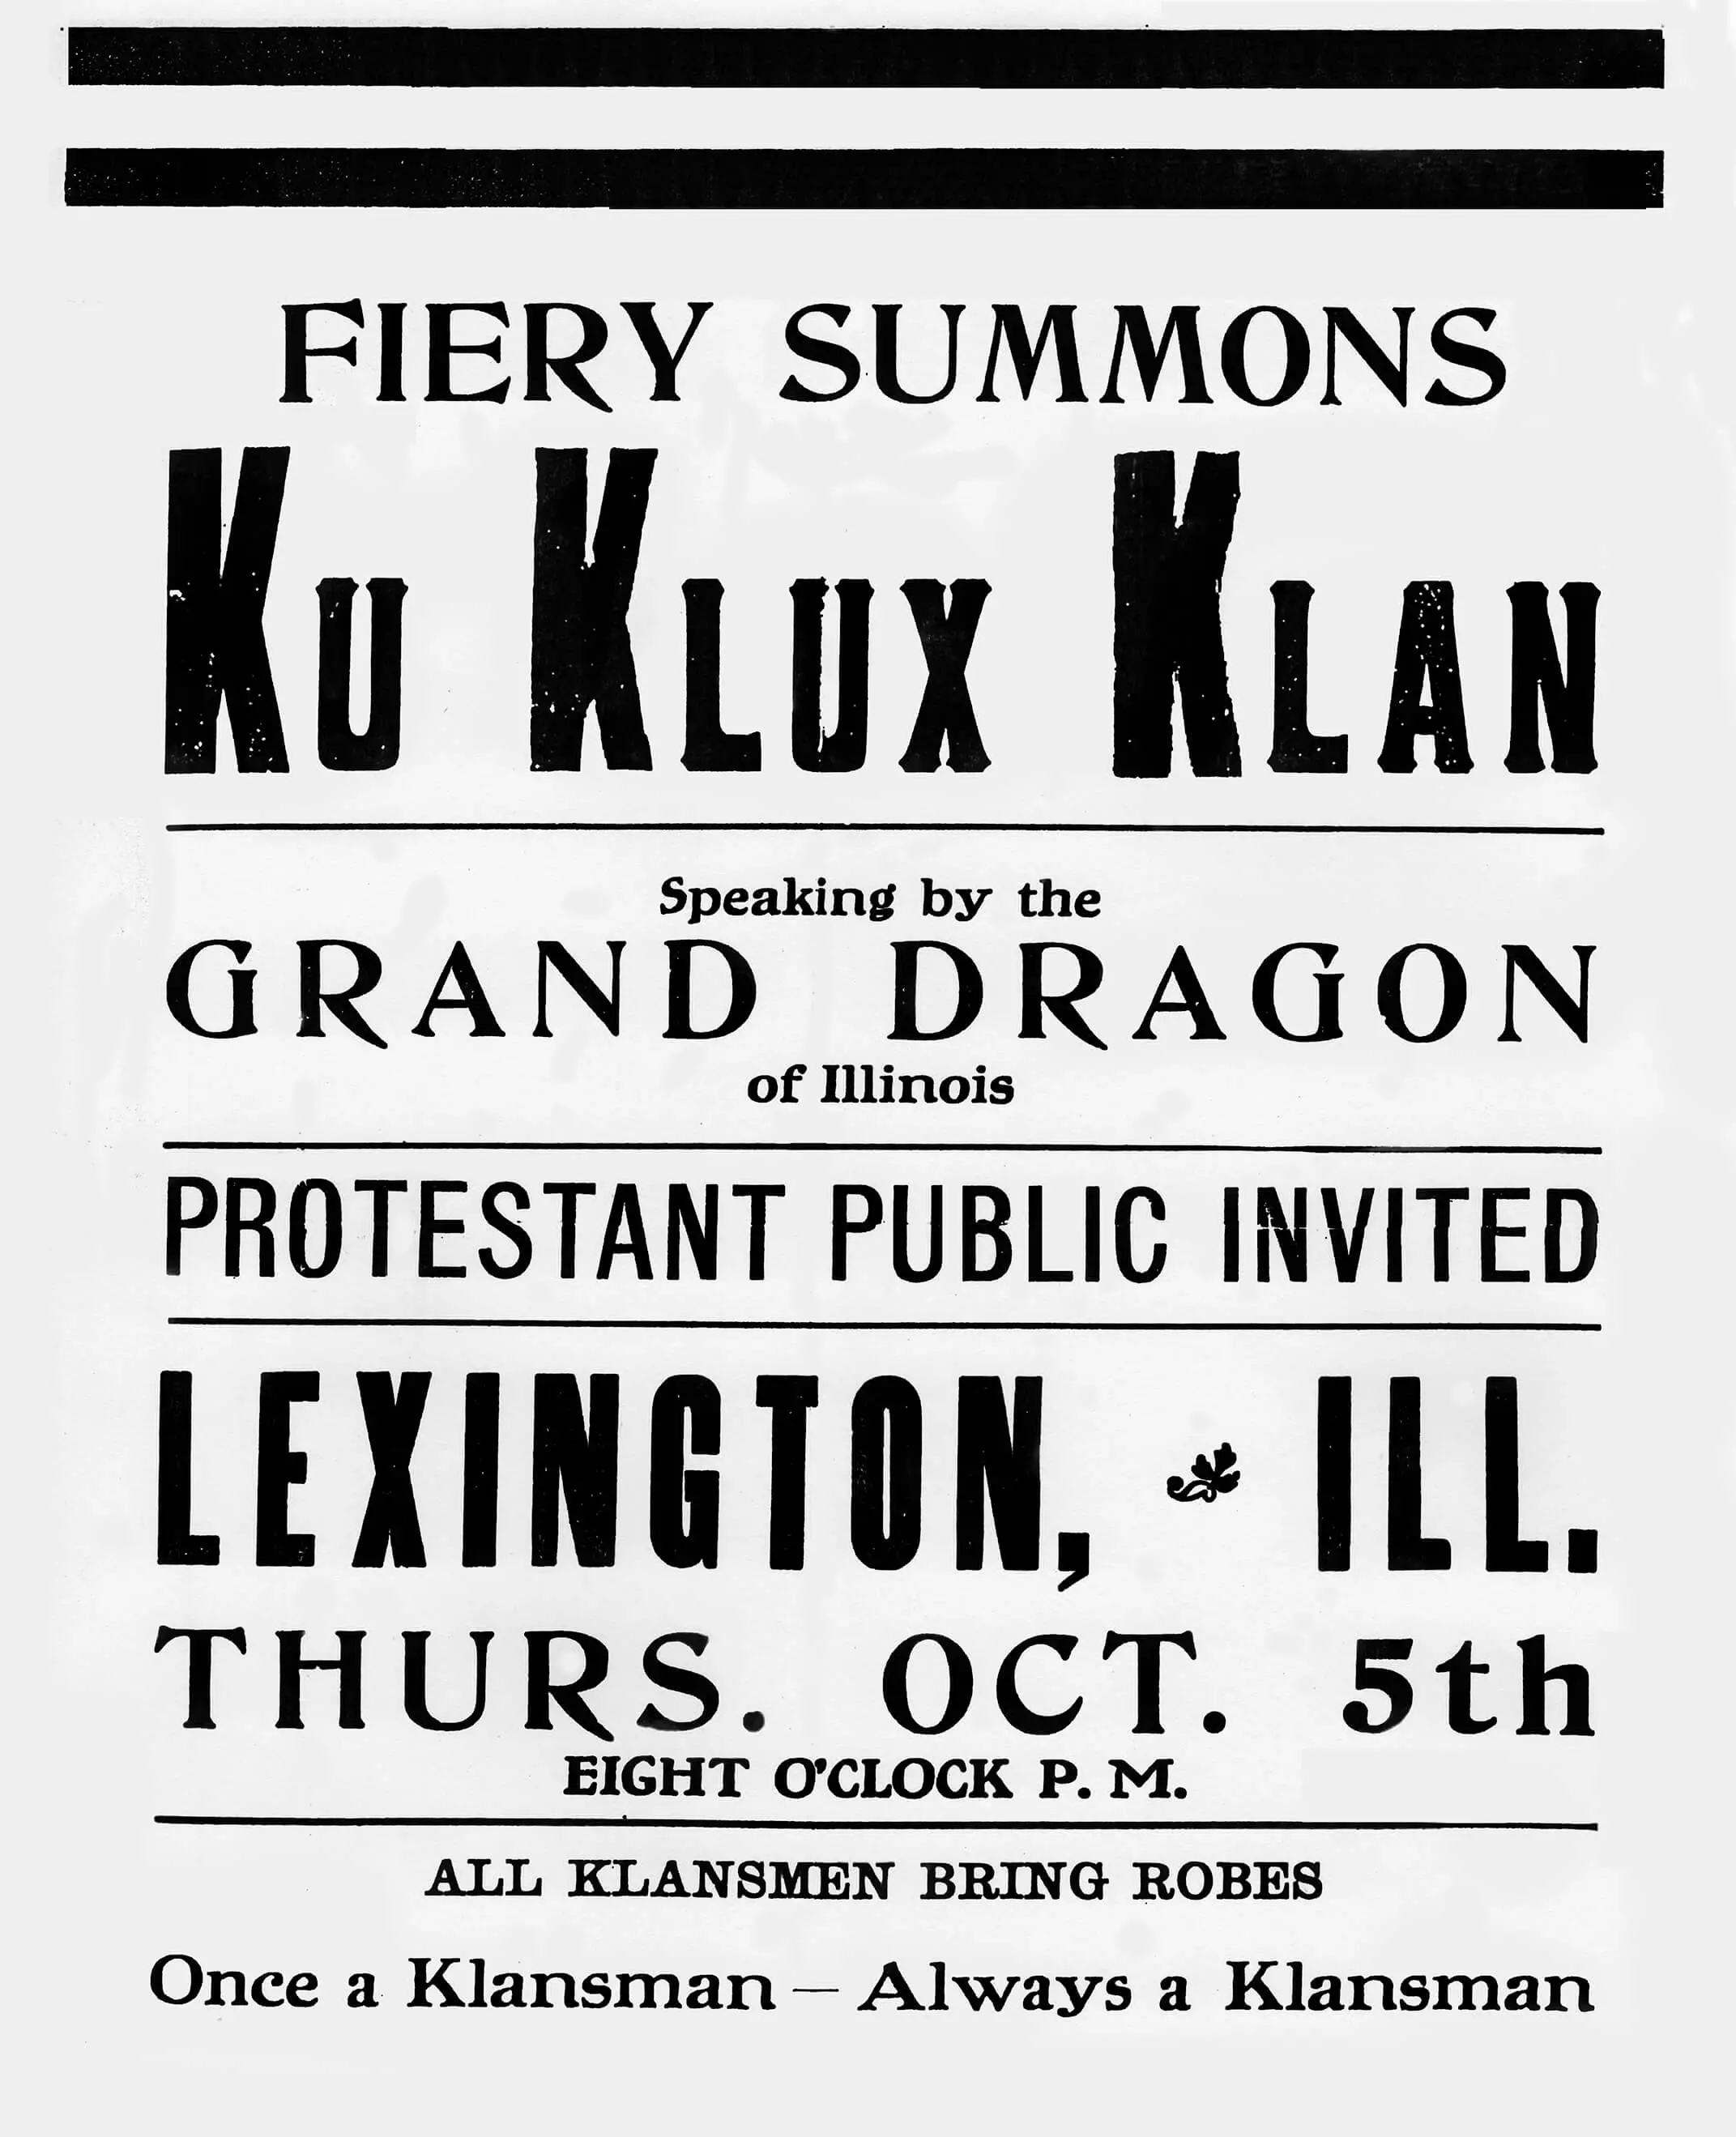 Flyer announcing 'fiery summons Ku Klux Klan' inviting the protestant public to an 8pm Thursday night meeting in Lexington, IL. It ends with the invitation to bring robes and the saying 'once a klansman always a klansman'